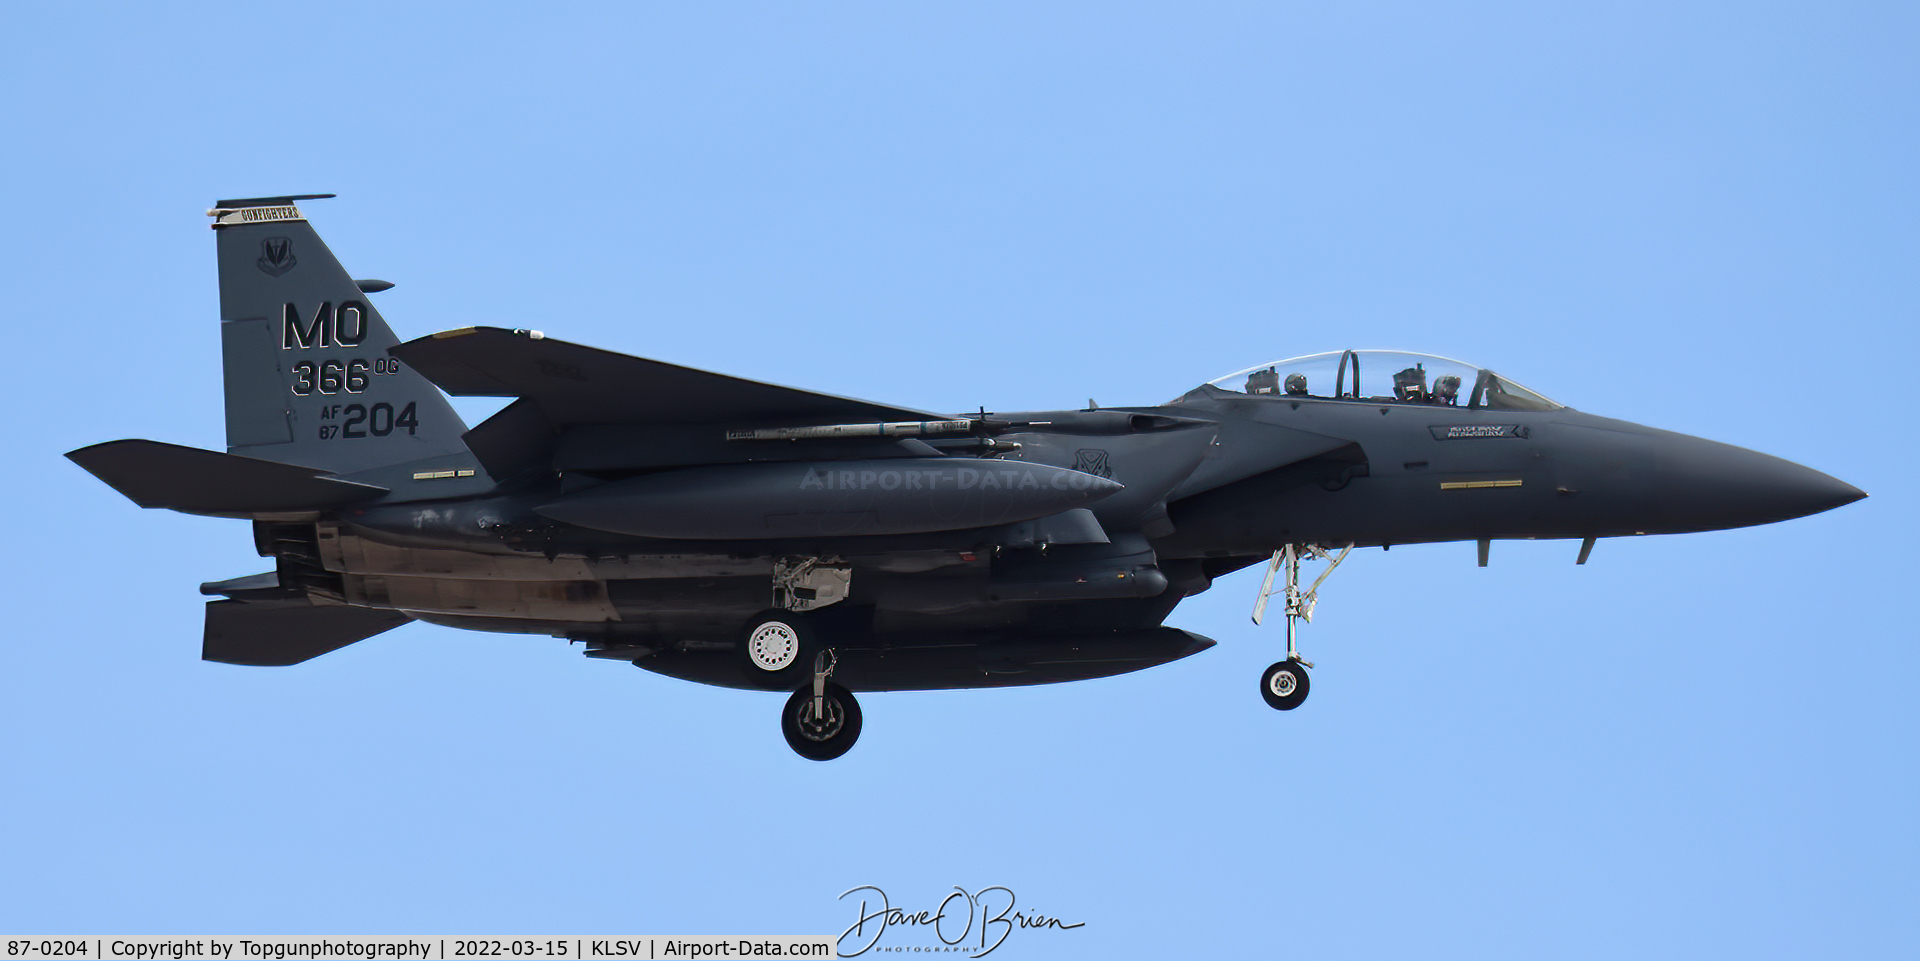 87-0204, 1987 McDonnell Douglas F-15E Strike Eagle C/N 1069-E044, 366th Operations Group jet from Mountain Home AFB